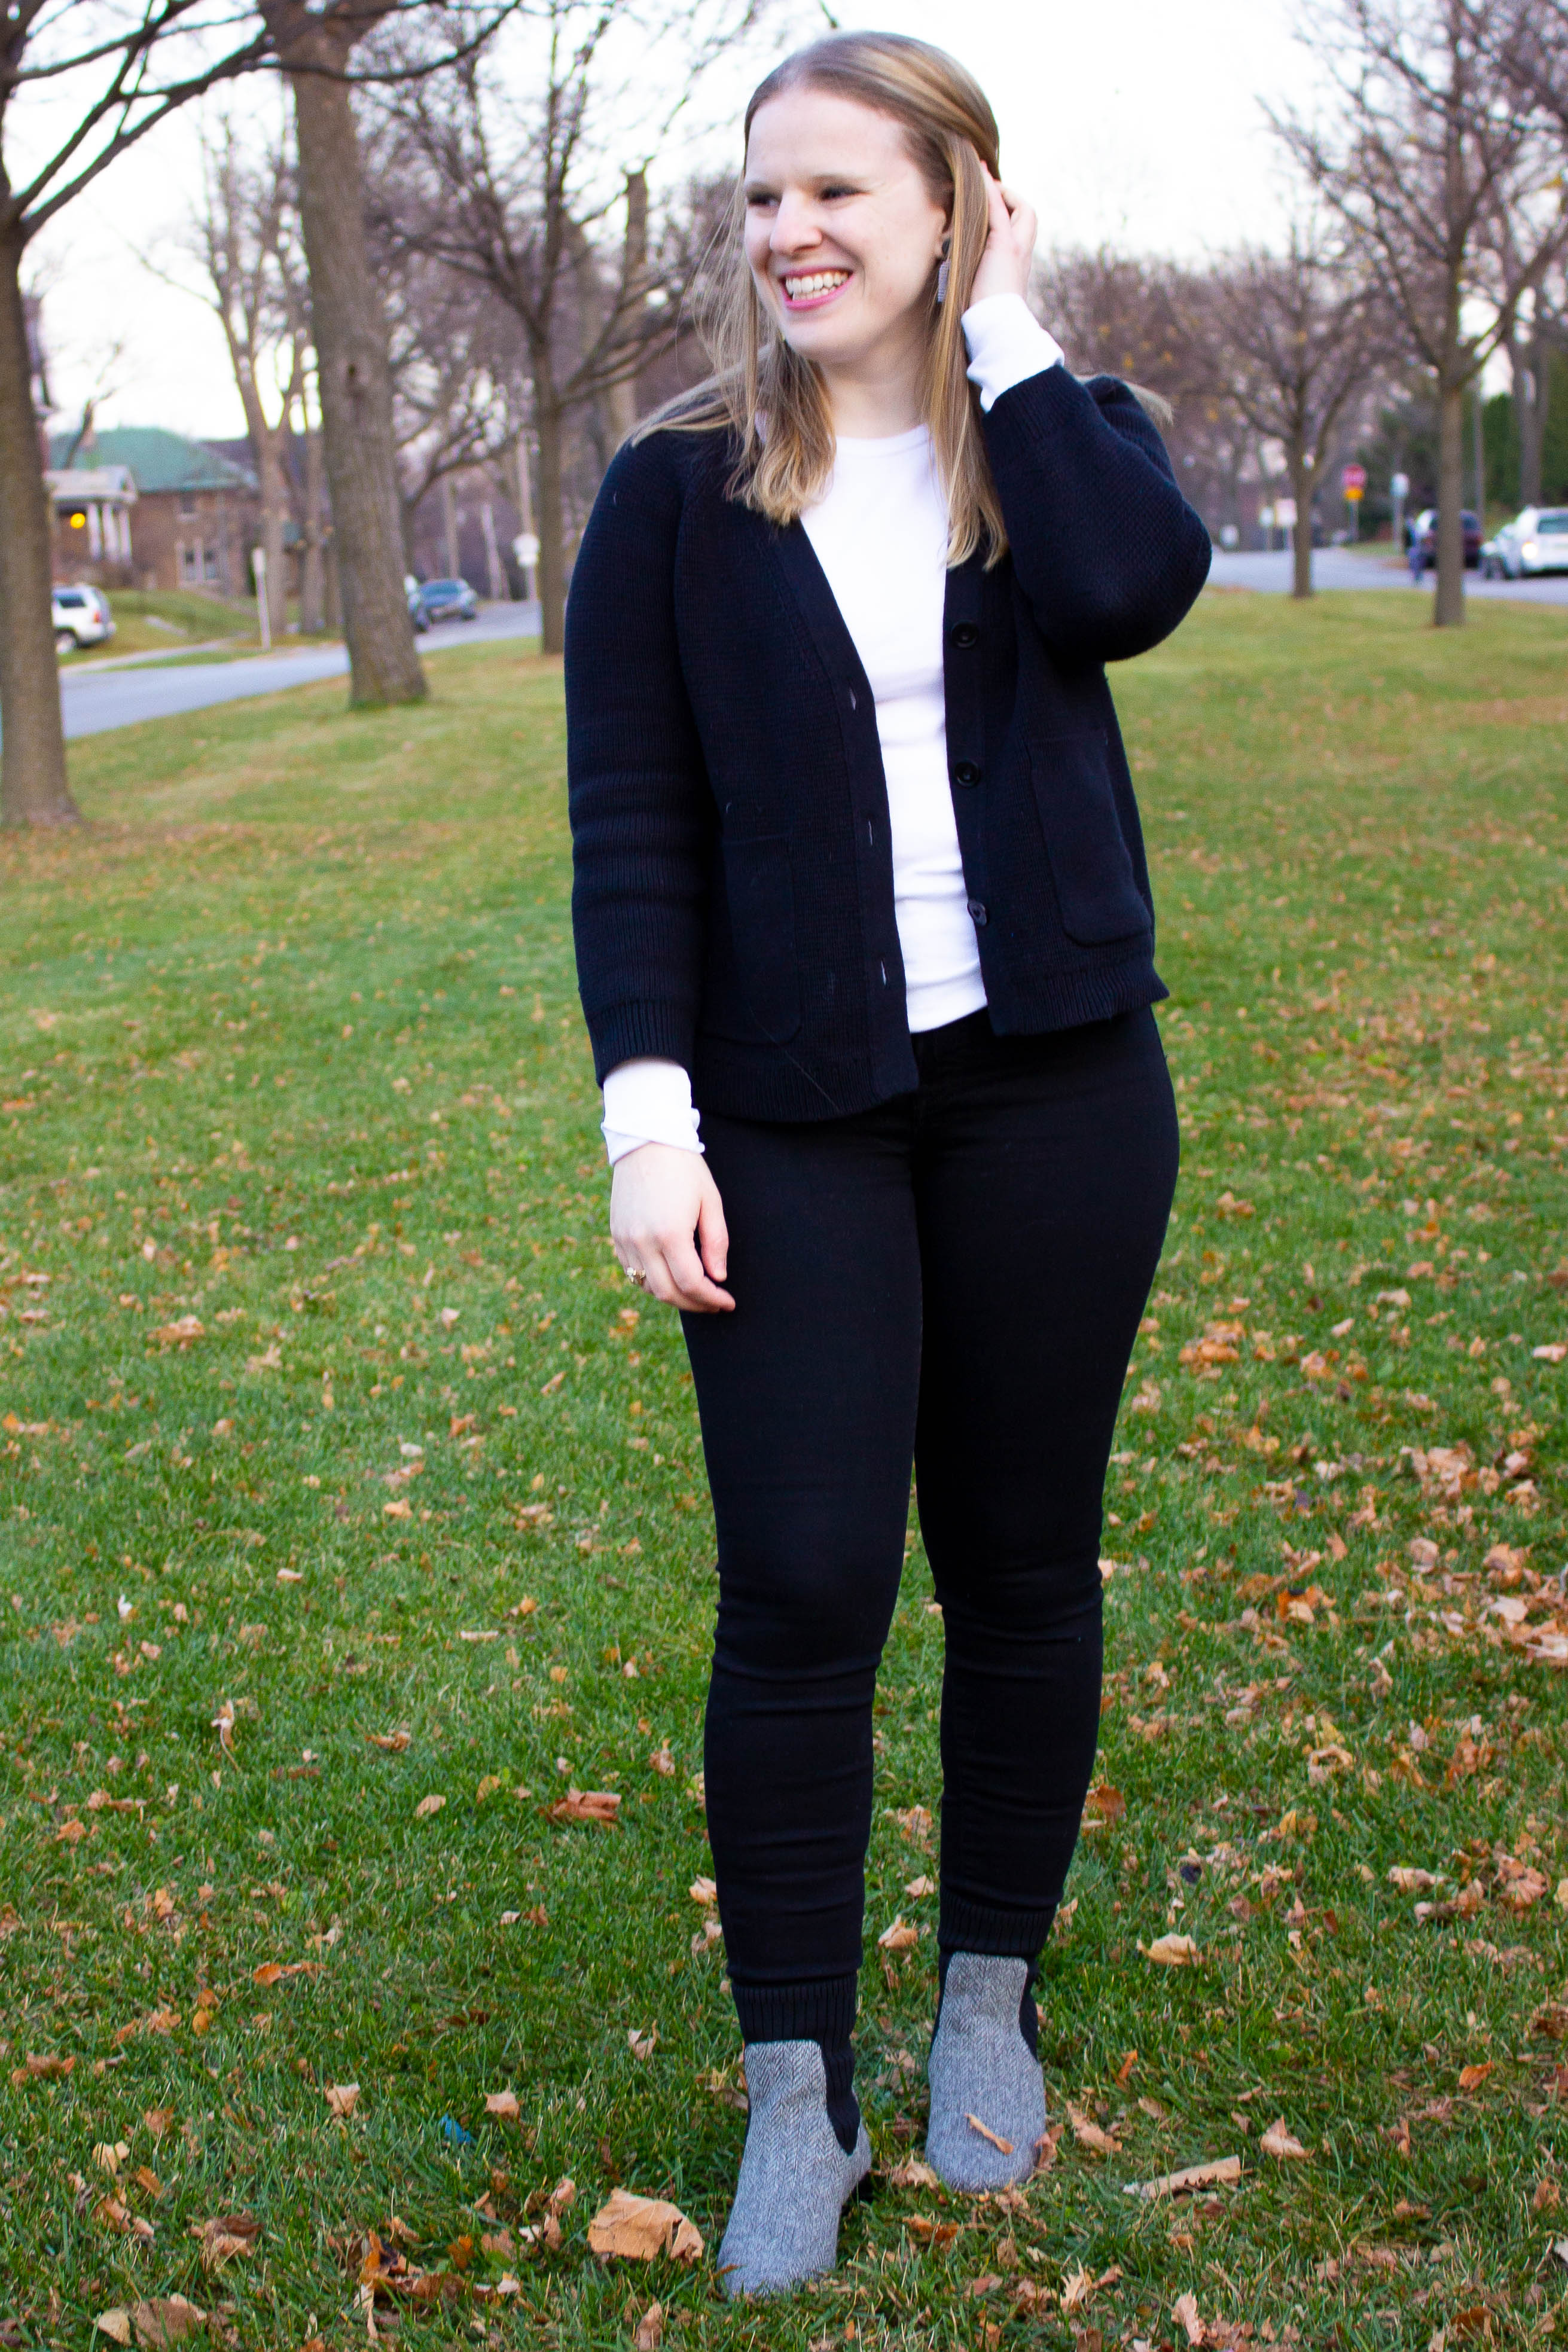 How to Style a Knit Black Cardigan